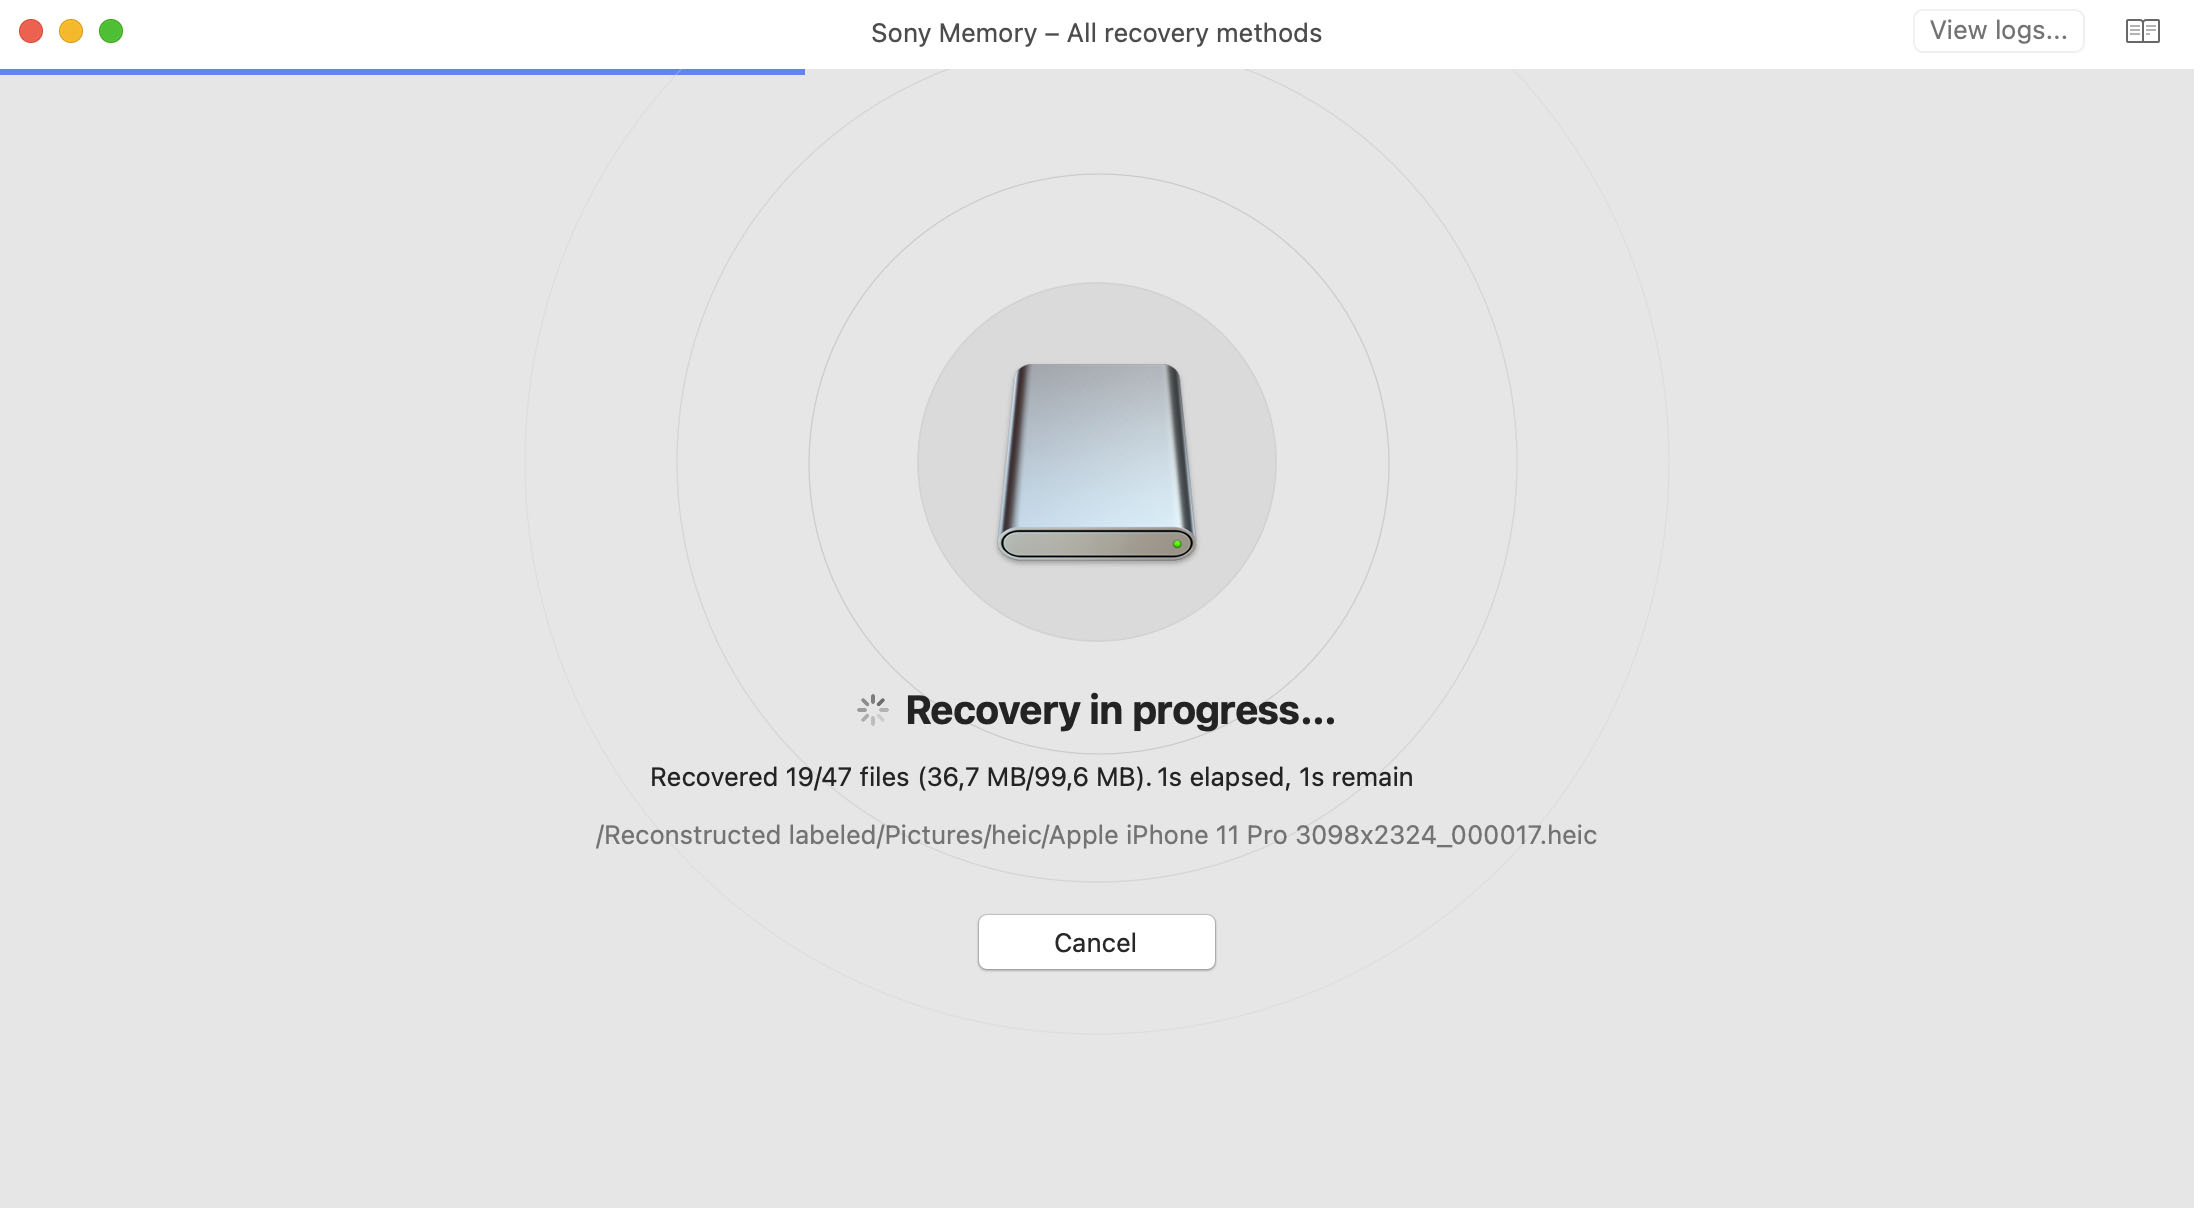 Recover Your Files